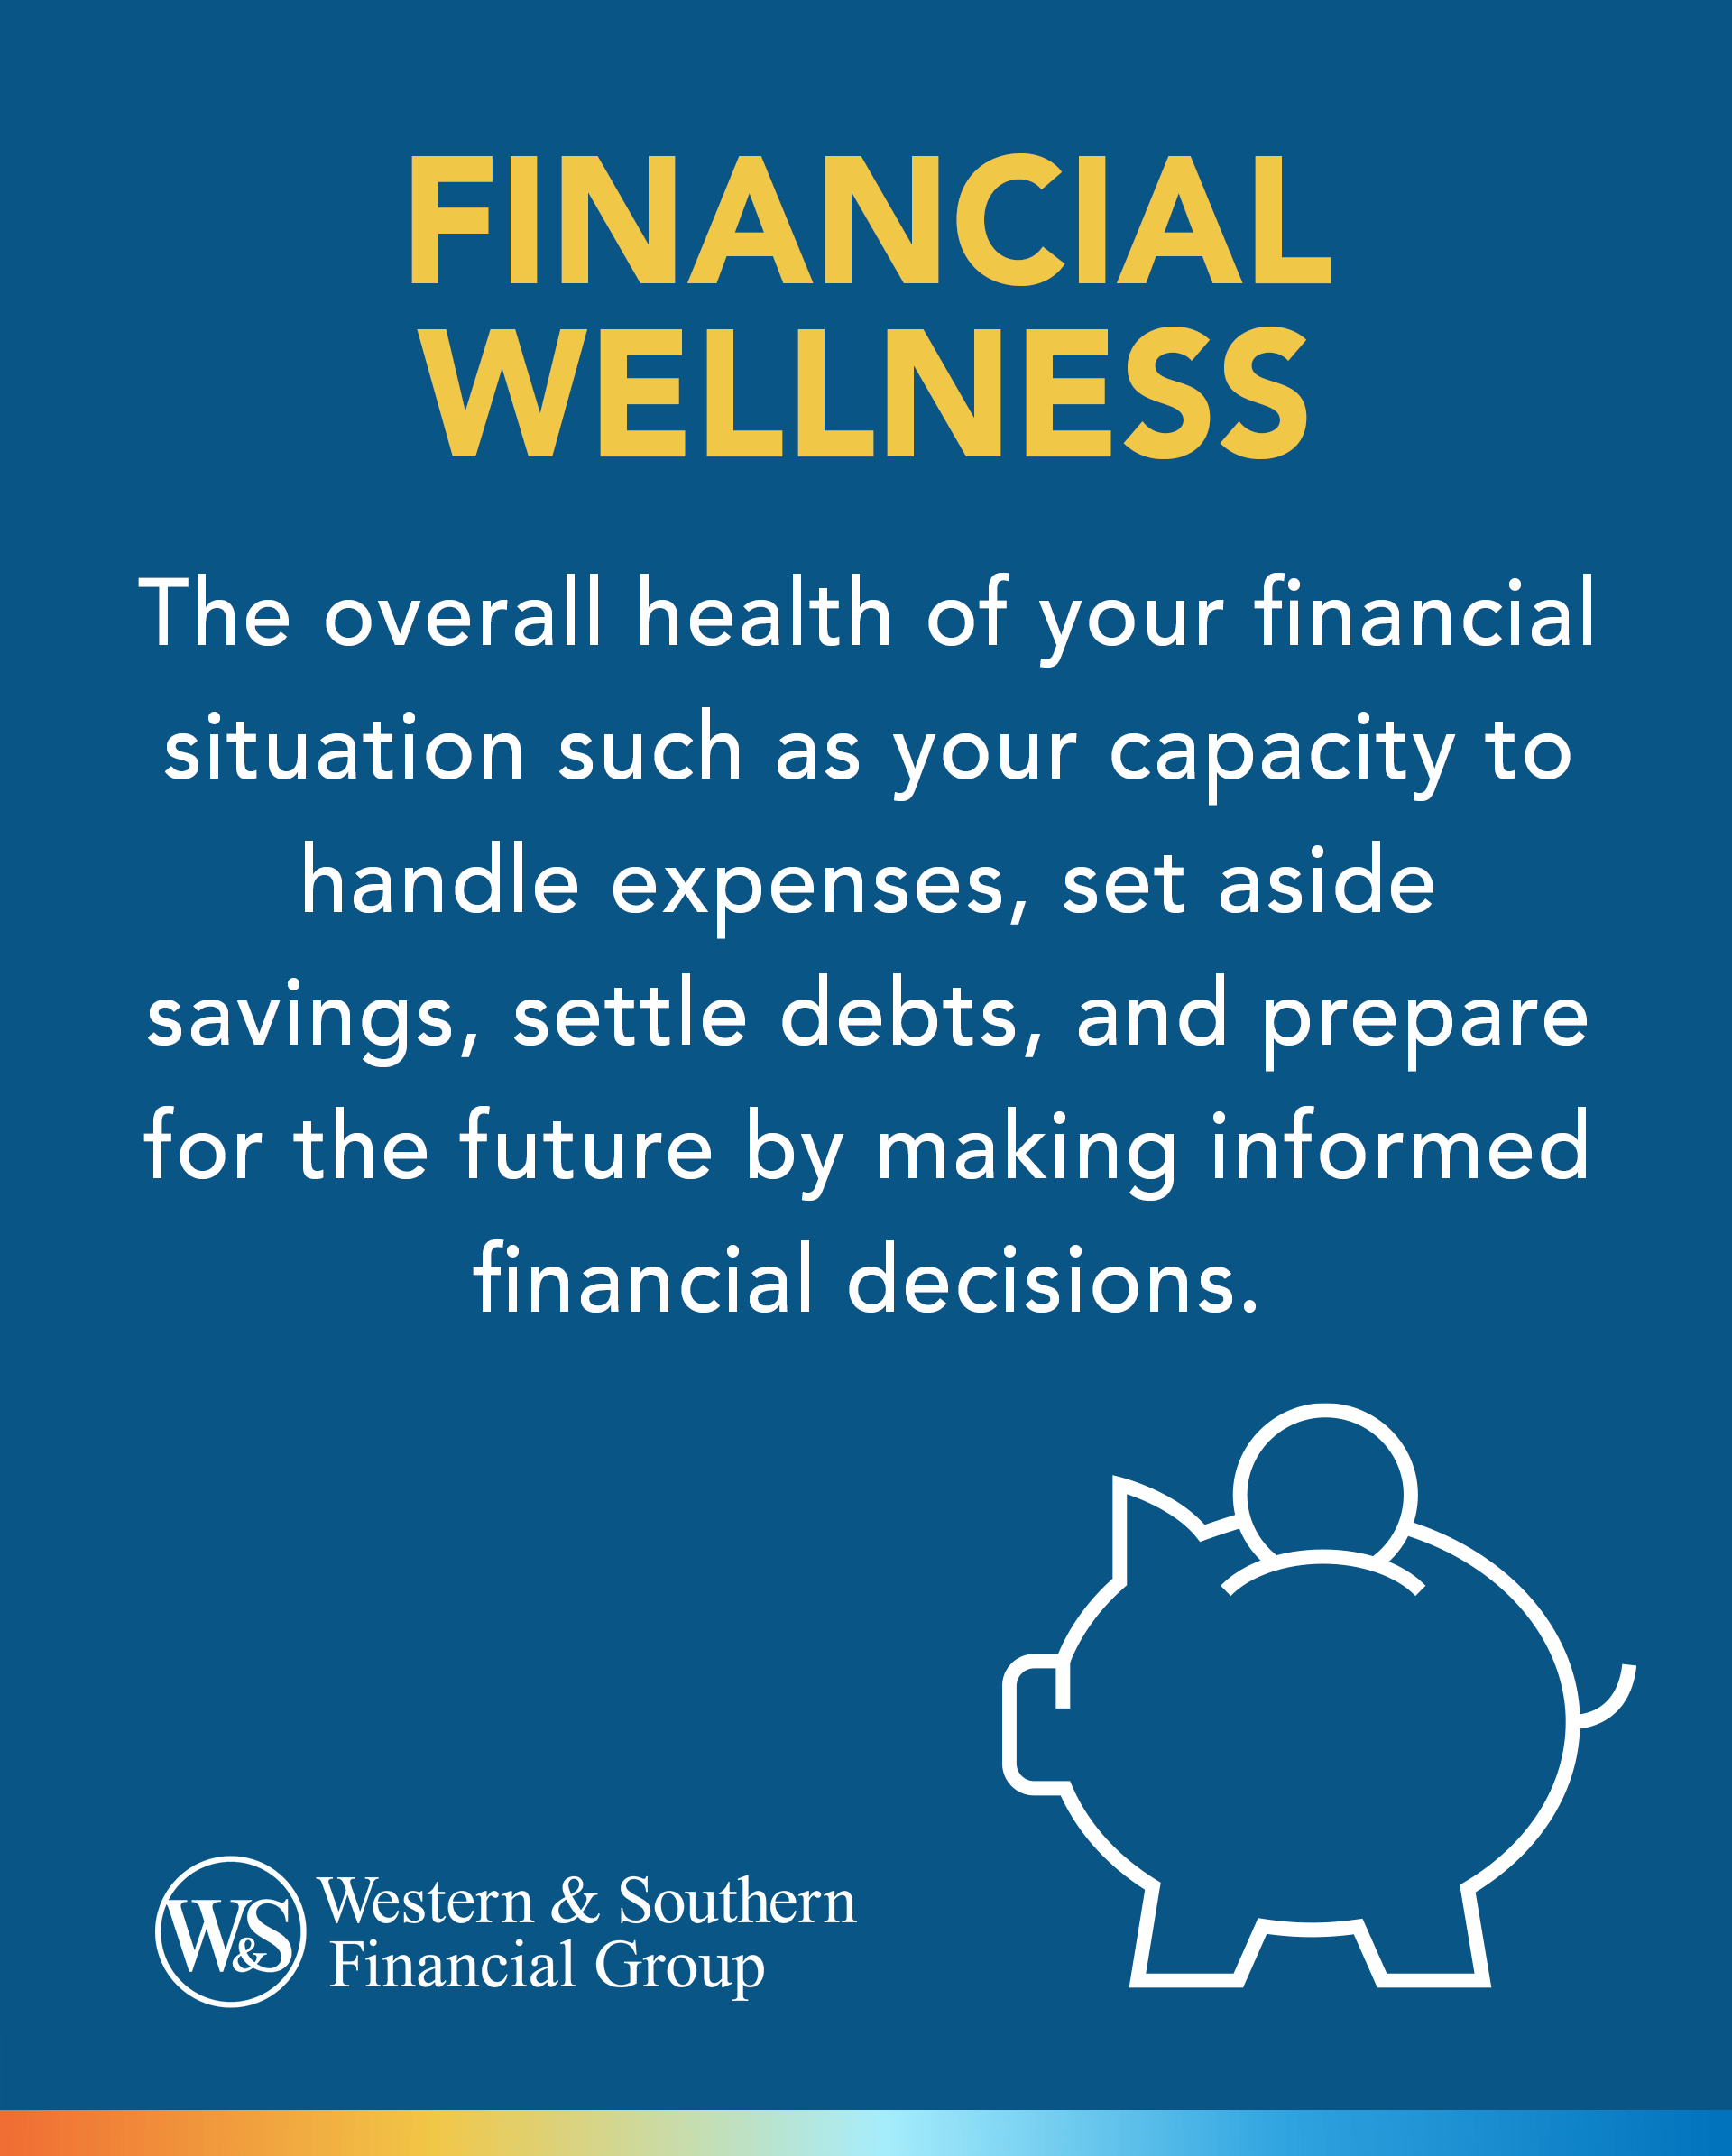 Financial Wellness Tips to Boost Your Financial Wellbeing